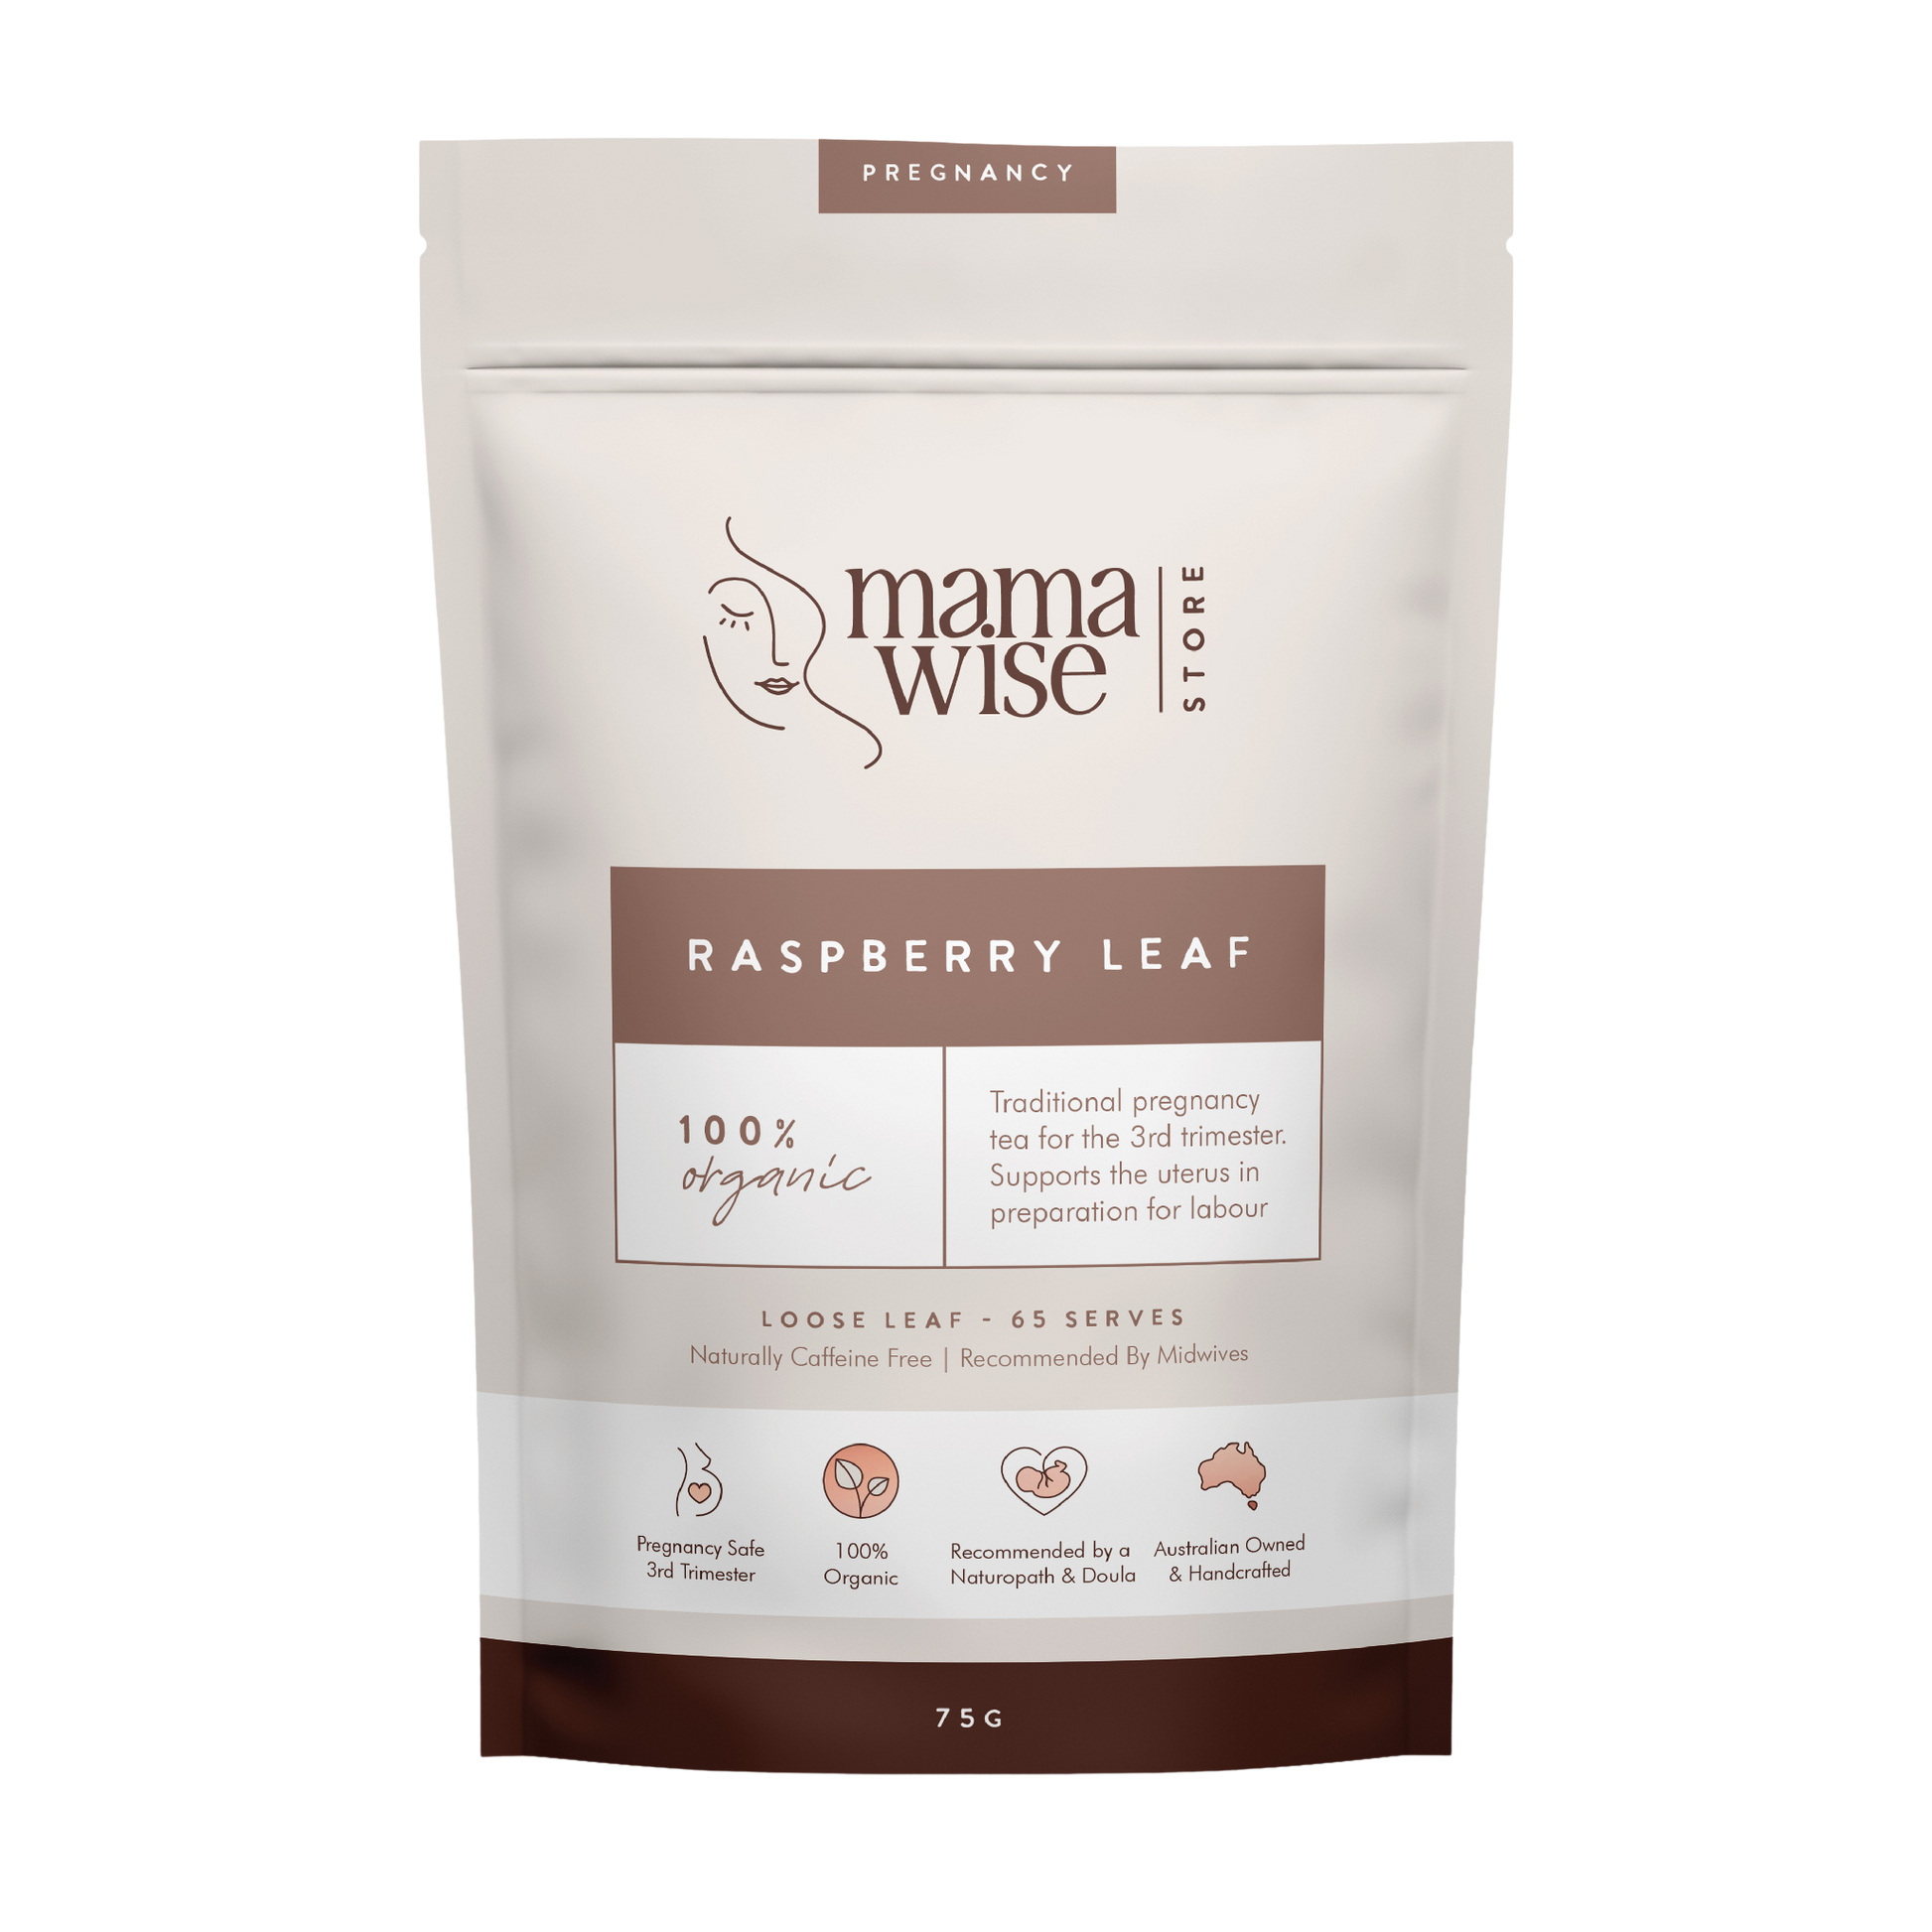 Mamawise Raspberry Leaf Tea 75gm pack, organic, pregnancy tea for third trimester to prepare for labour